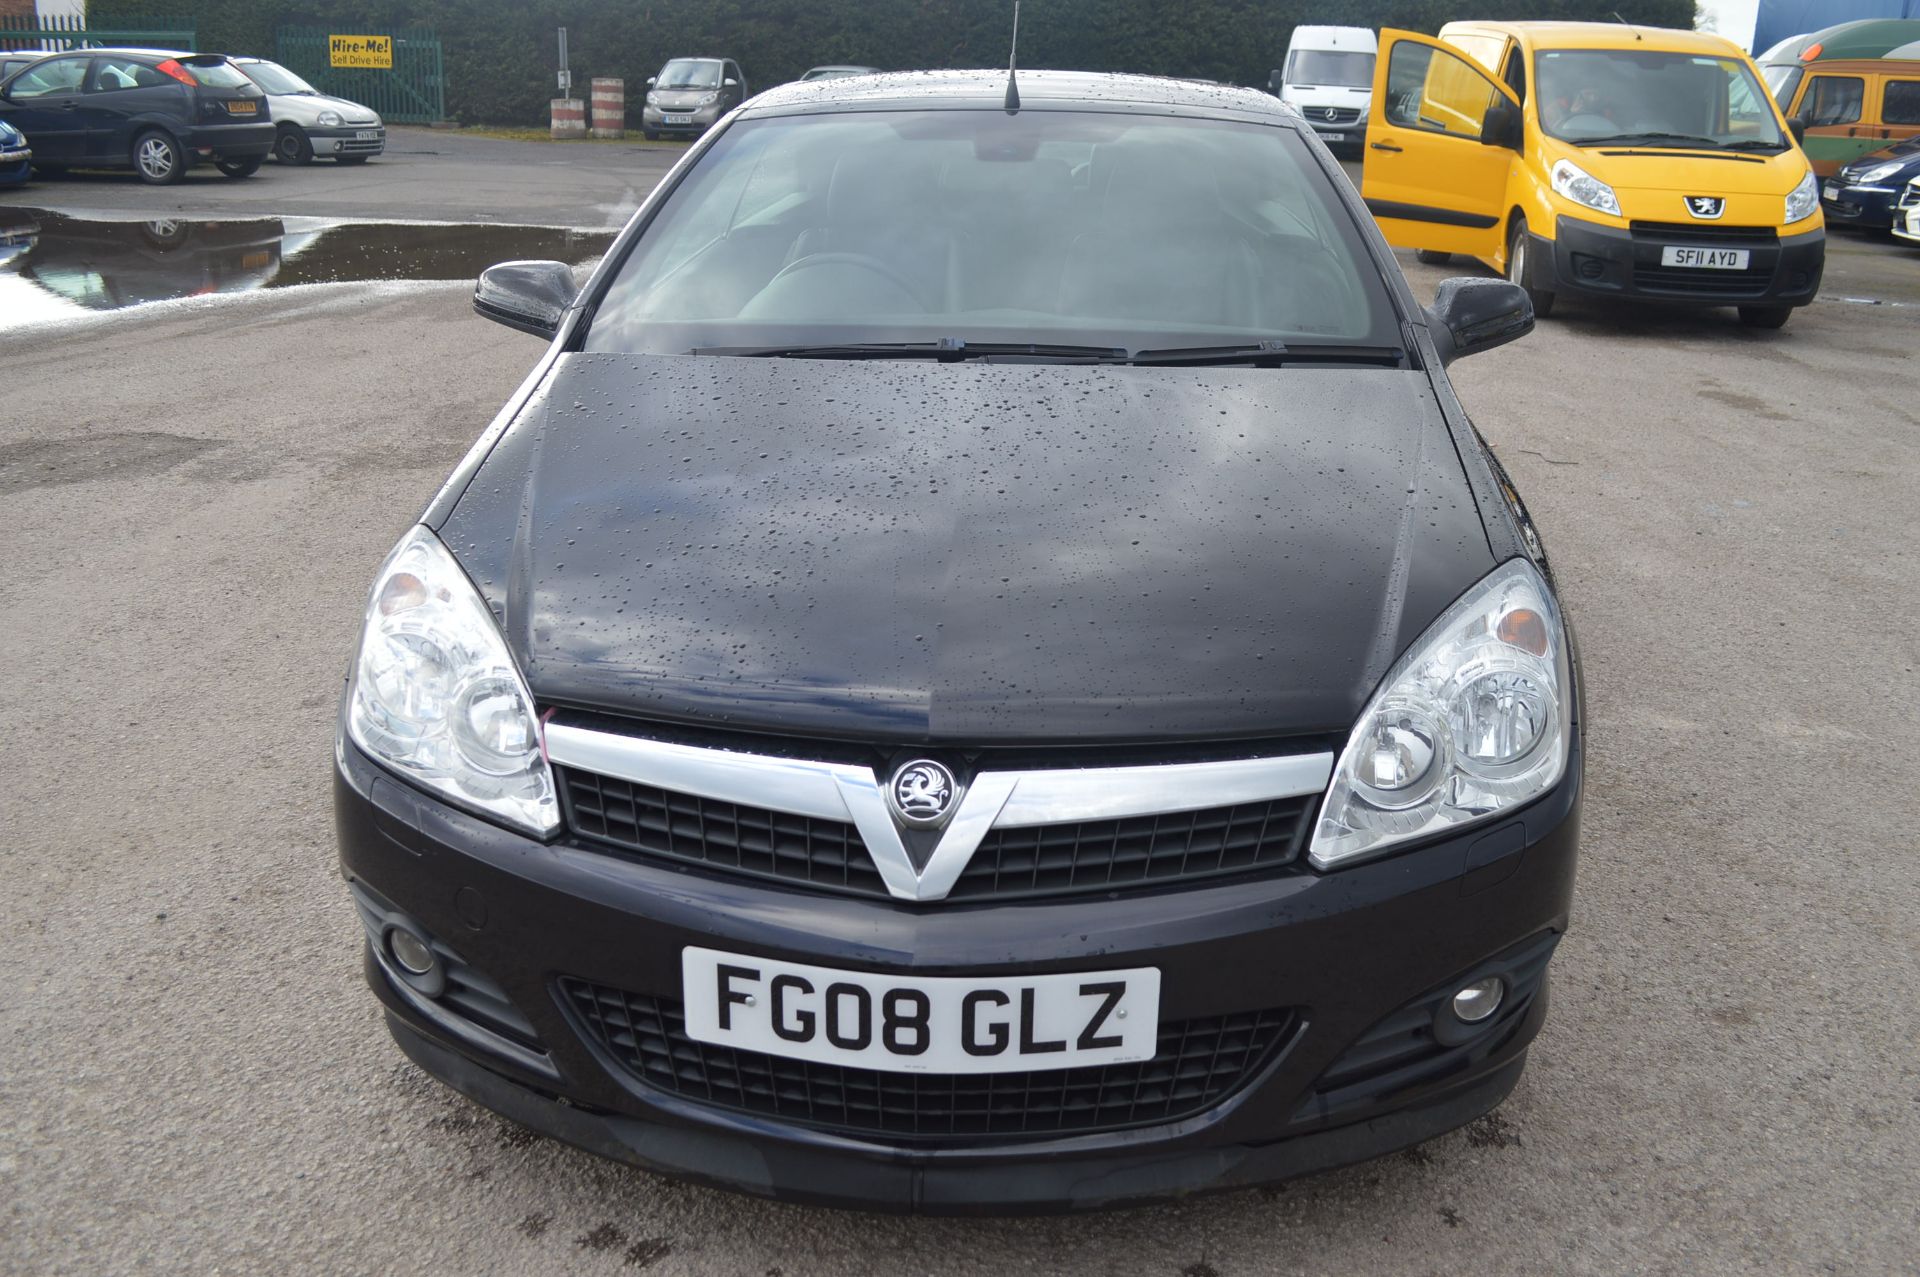 K - 2008/08 REG VAUXHALL ASTRA T-TOP DESIGN CDTI - ROOF CAN BE PUT DOWN/UP WITH THE KEY   DATE OF - Image 21 of 22